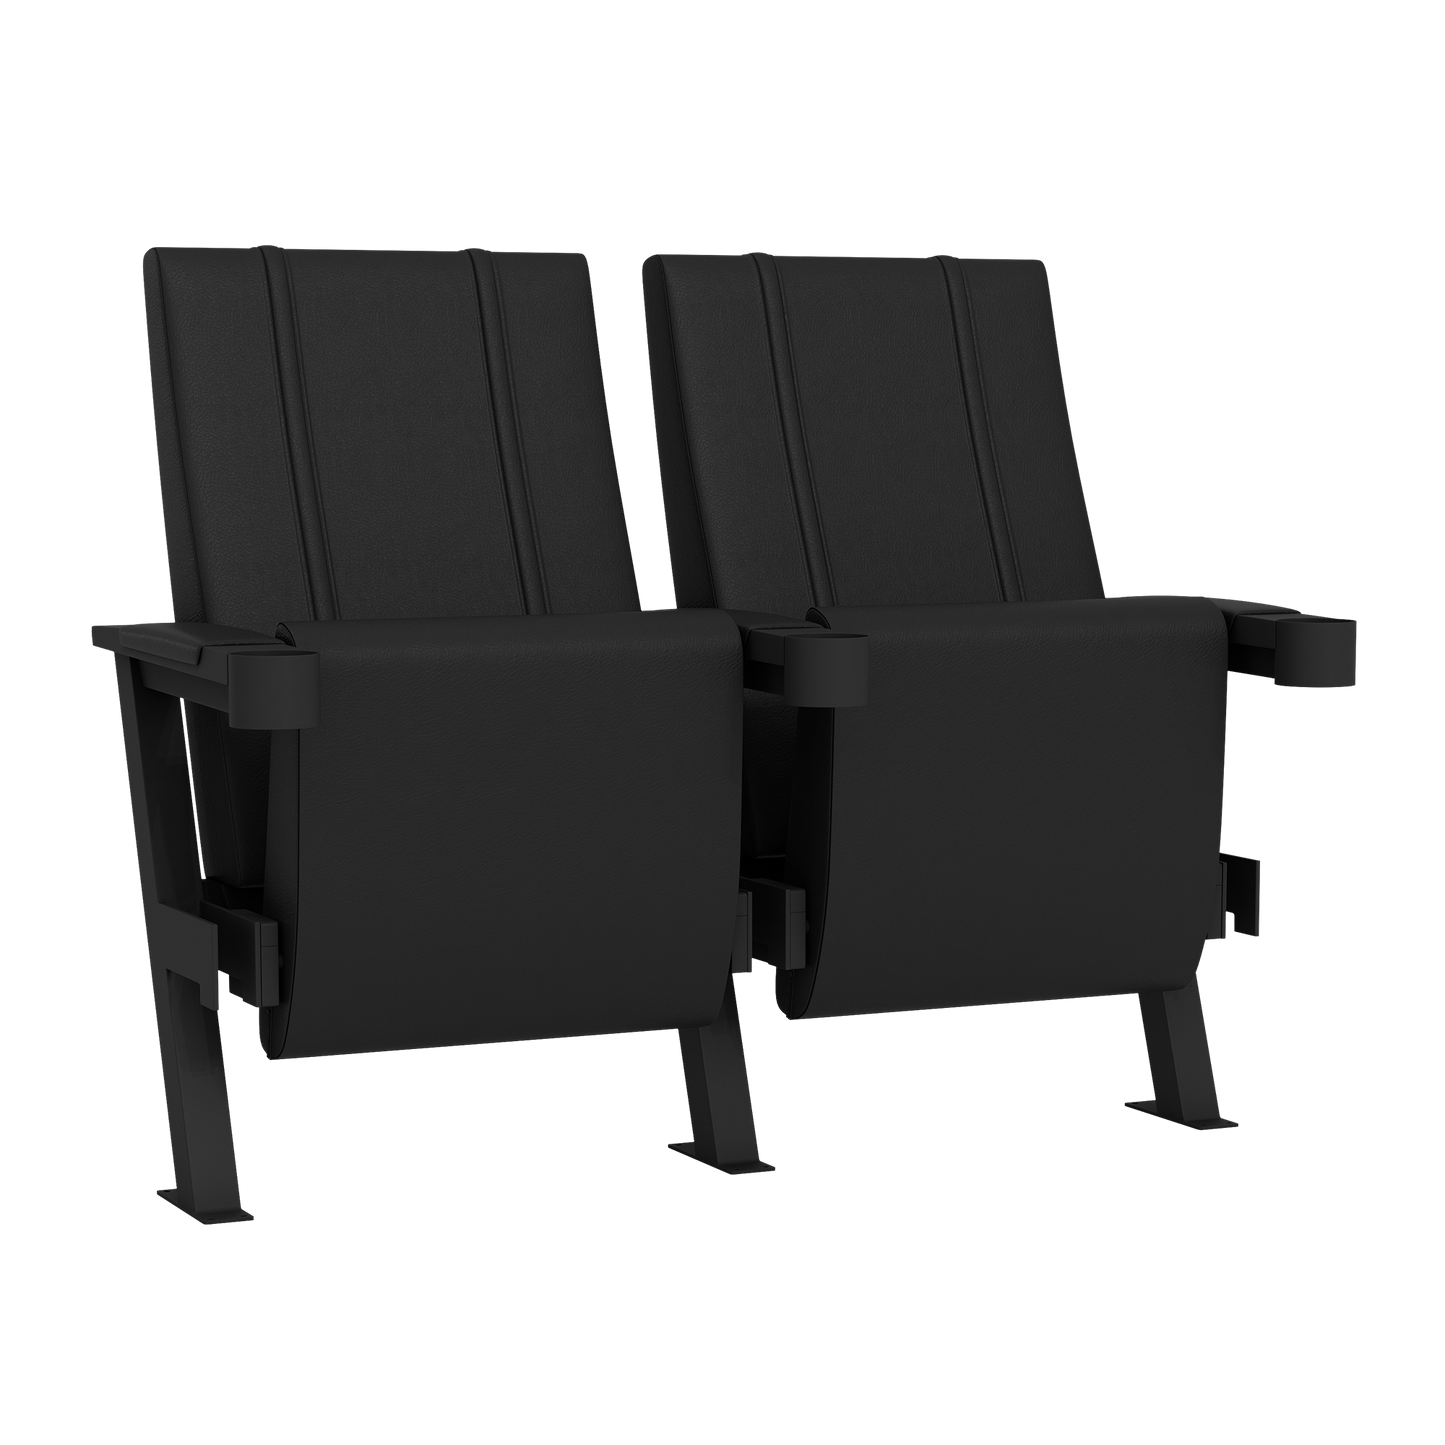 SuiteMax 3.5 VIP Seats with New York Red Bulls Logo